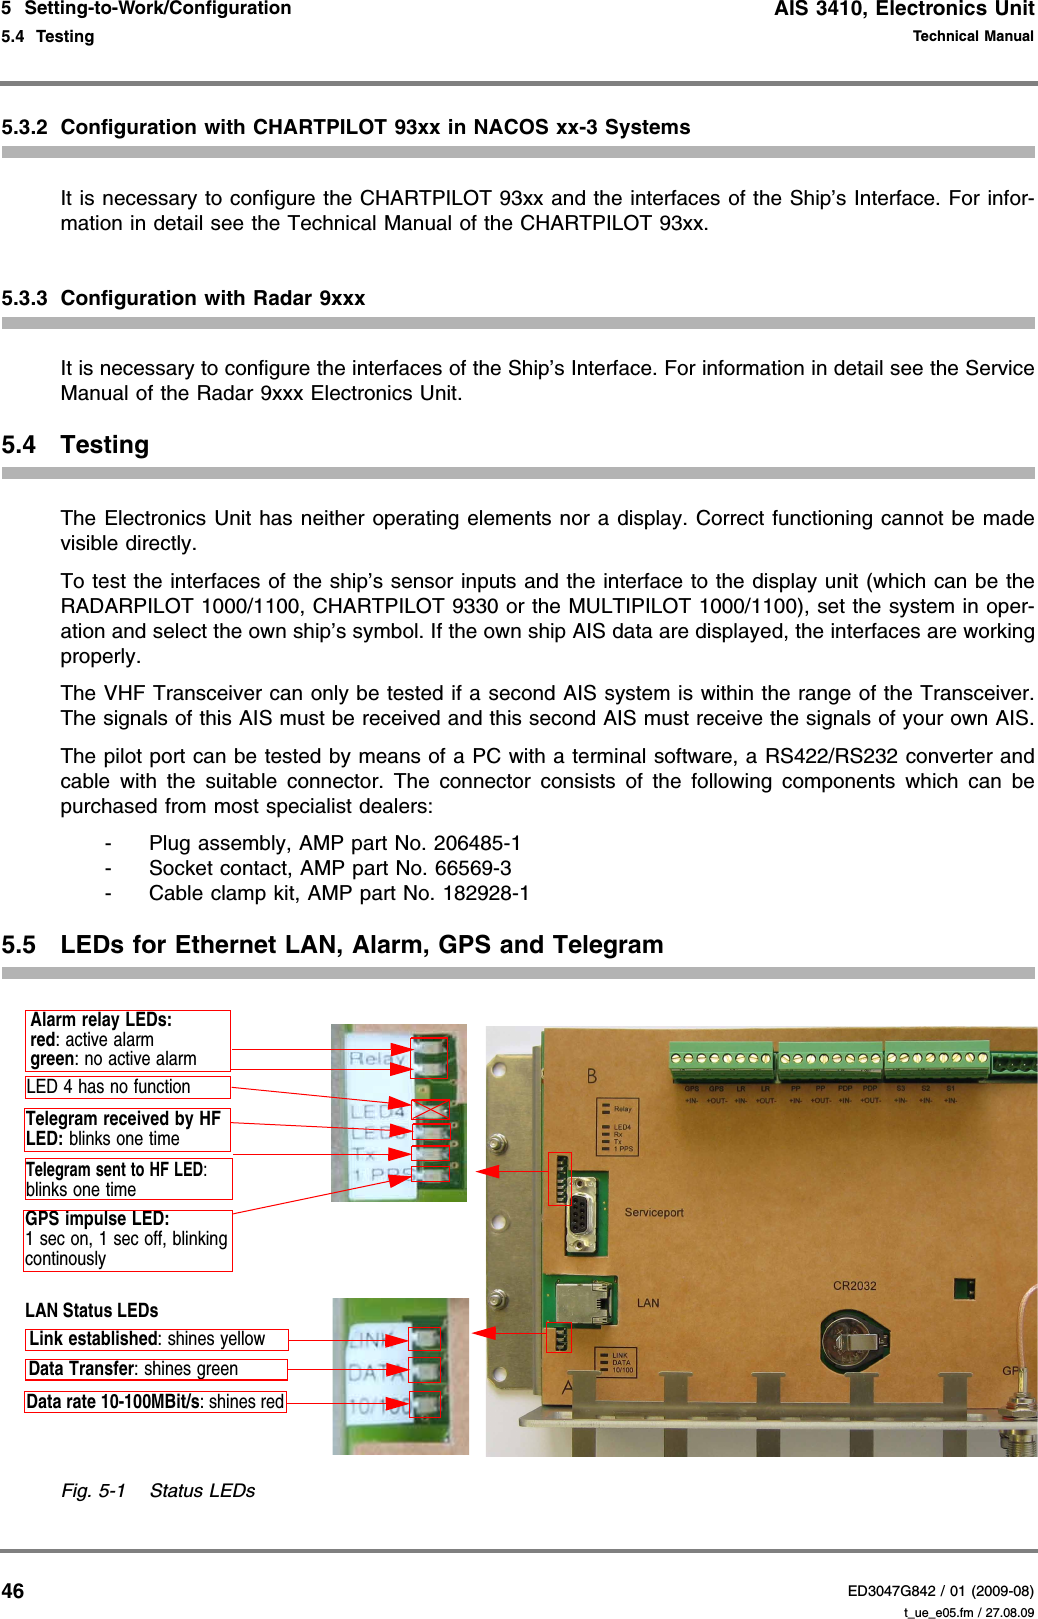 AIS 3410, Electronics UnitED3047G842 / 01 (2009-08)Technical Manual5  Setting-to-Work/Configuration5.4  Testing t_ue_e05.fm / 27.08.09465.3.2 Configuration with CHARTPILOT 93xx in NACOS xx-3 SystemsIt is necessary to configure the CHARTPILOT 93xx and the interfaces of the Ship’s Interface. For infor-mation in detail see the Technical Manual of the CHARTPILOT 93xx.5.3.3 Configuration with Radar 9xxxIt is necessary to configure the interfaces of the Ship’s Interface. For information in detail see the Service Manual of the Radar 9xxx Electronics Unit.5.4 TestingThe Electronics Unit has neither operating elements nor a display. Correct functioning cannot be made visible directly.To test the interfaces of the ship’s sensor inputs and the interface to the display unit (which can be the RADARPILOT 1000/1100, CHARTPILOT 9330 or the MULTIPILOT 1000/1100), set the system in oper-ation and select the own ship’s symbol. If the own ship AIS data are displayed, the interfaces are working properly.The VHF Transceiver can only be tested if a second AIS system is within the range of the Transceiver. The signals of this AIS must be received and this second AIS must receive the signals of your own AIS.The pilot port can be tested by means of a PC with a terminal software, a RS422/RS232 converter and cable with the suitable connector. The connector consists of the following components which can be purchased from most specialist dealers:- Plug assembly, AMP part No. 206485-1- Socket contact, AMP part No. 66569-3- Cable clamp kit, AMP part No. 182928-15.5 LEDs for Ethernet LAN, Alarm, GPS and TelegramFig. 5-1 Status LEDsAlarm relay LEDs:red: active alarmgreen: no active alarmLED 4 has no functionTelegram sent to HF LED:blinks one timeGPS impulse LED:1 sec on, 1 sec off, blinking continouslyLAN Status LEDsLink established: shines yellowData Transfer: shines greenData rate 10-100MBit/s: shines redTelegram received by HF LED: blinks one time